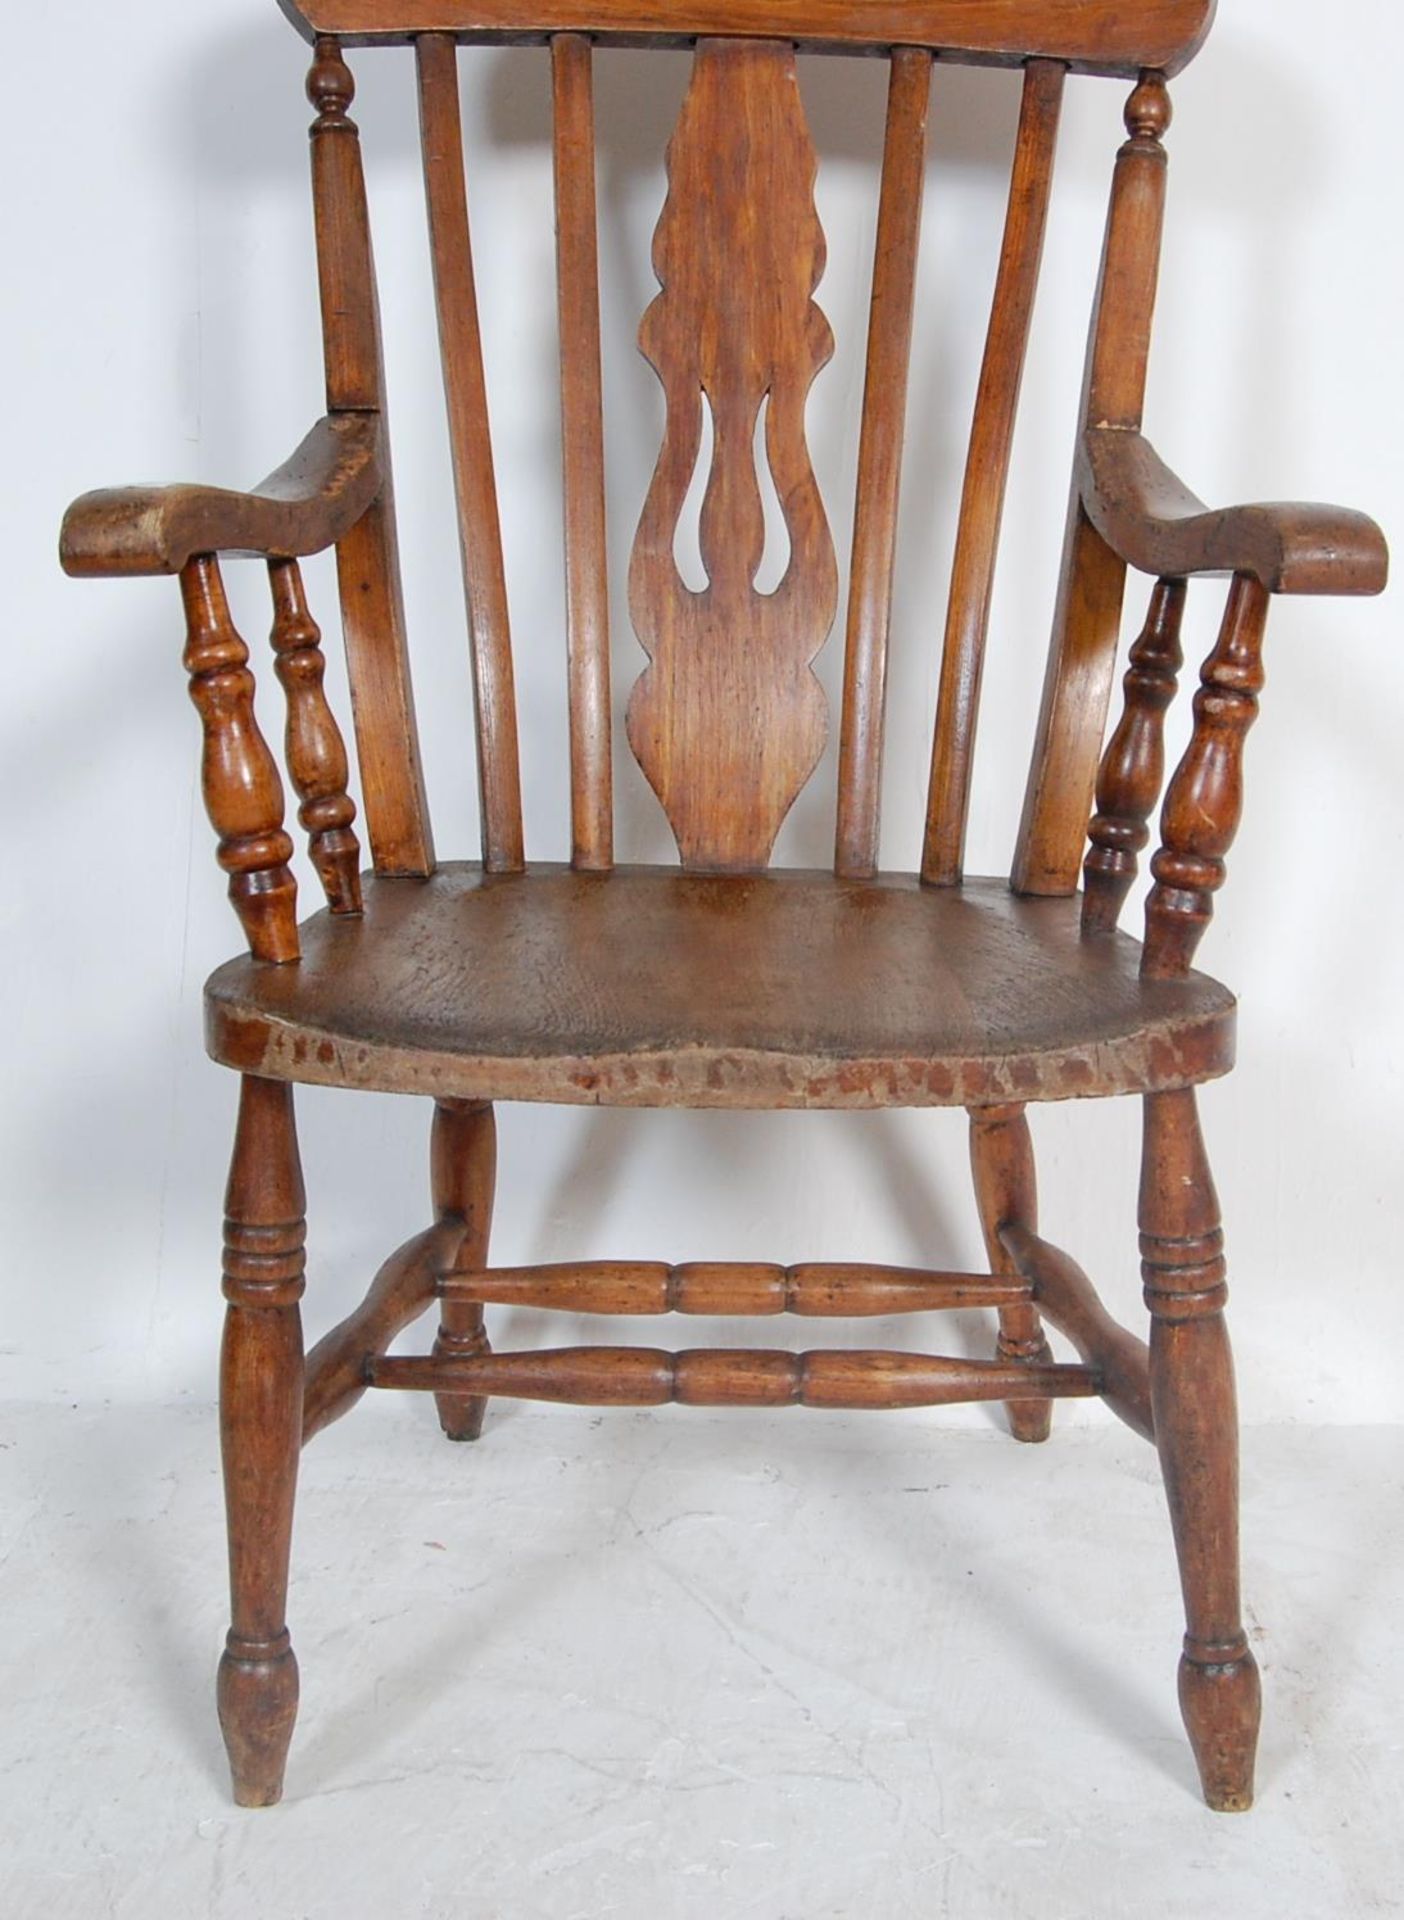 19TH CENTURY VICTORIAN BEECH AND ELM WINDSOR CHAIR - Image 5 of 7